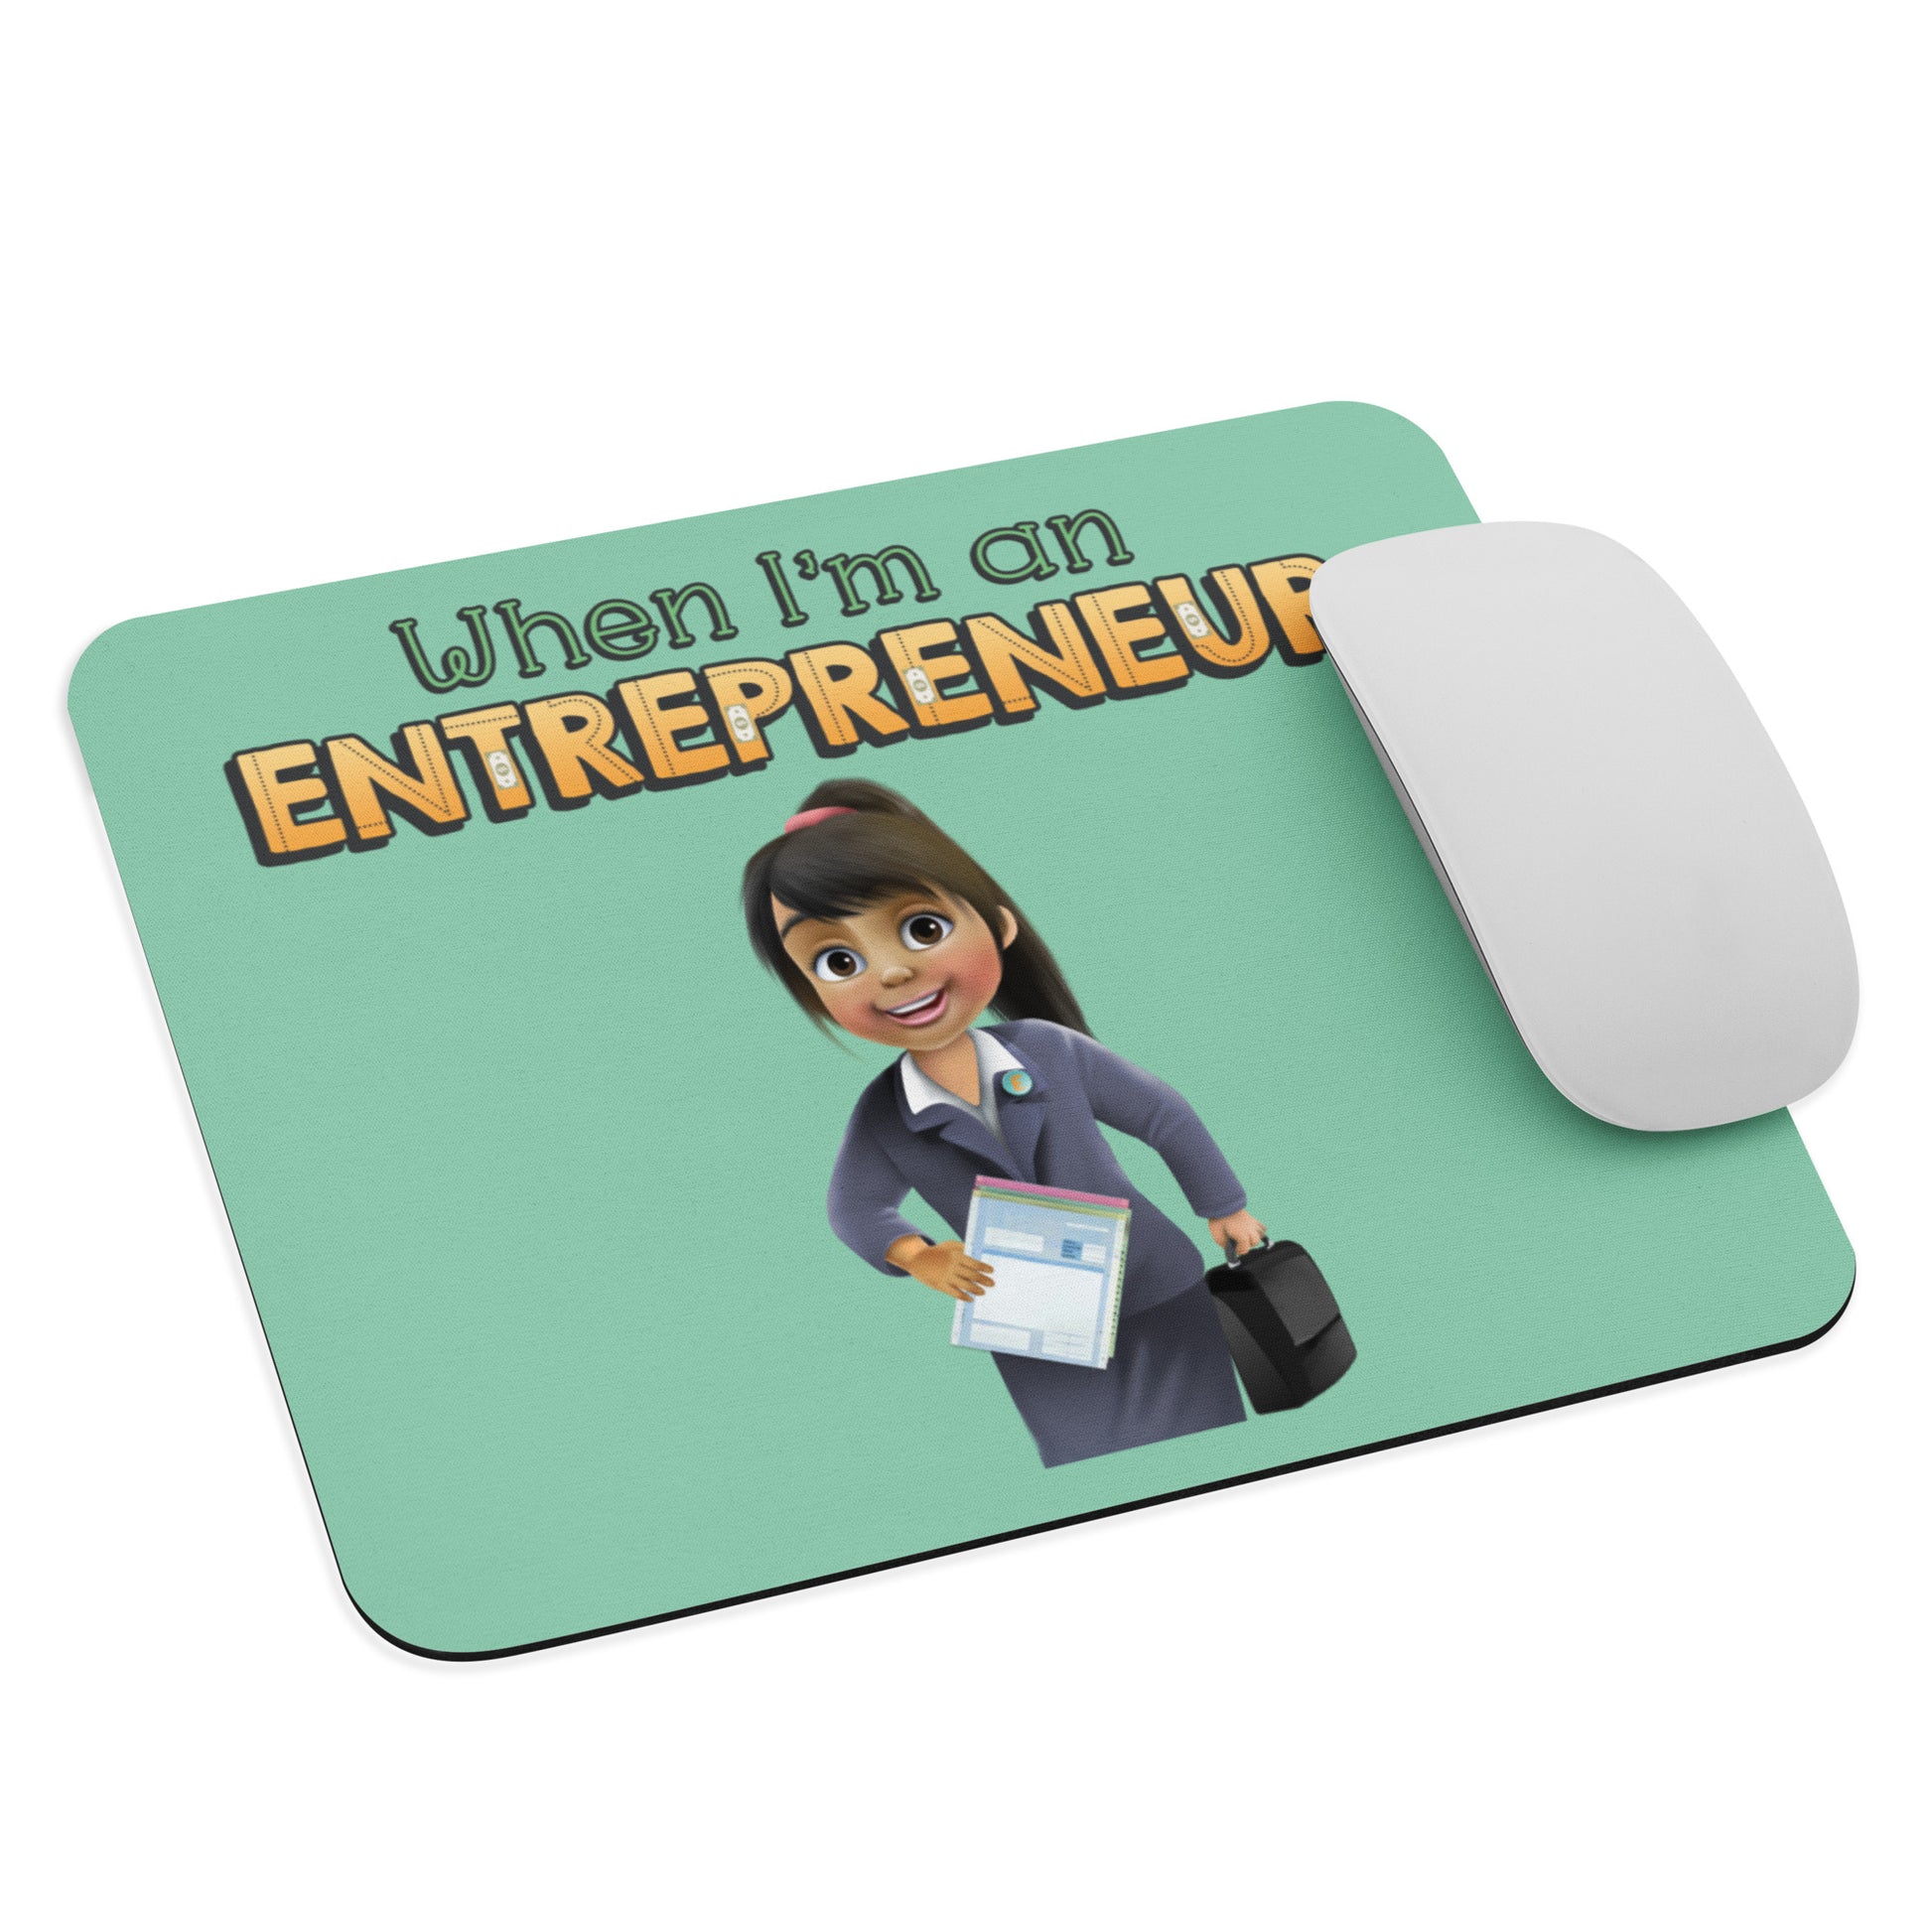 The coolest, cutest, best-selling mouse pad for a female entrepreneur, CEO or girl boss.